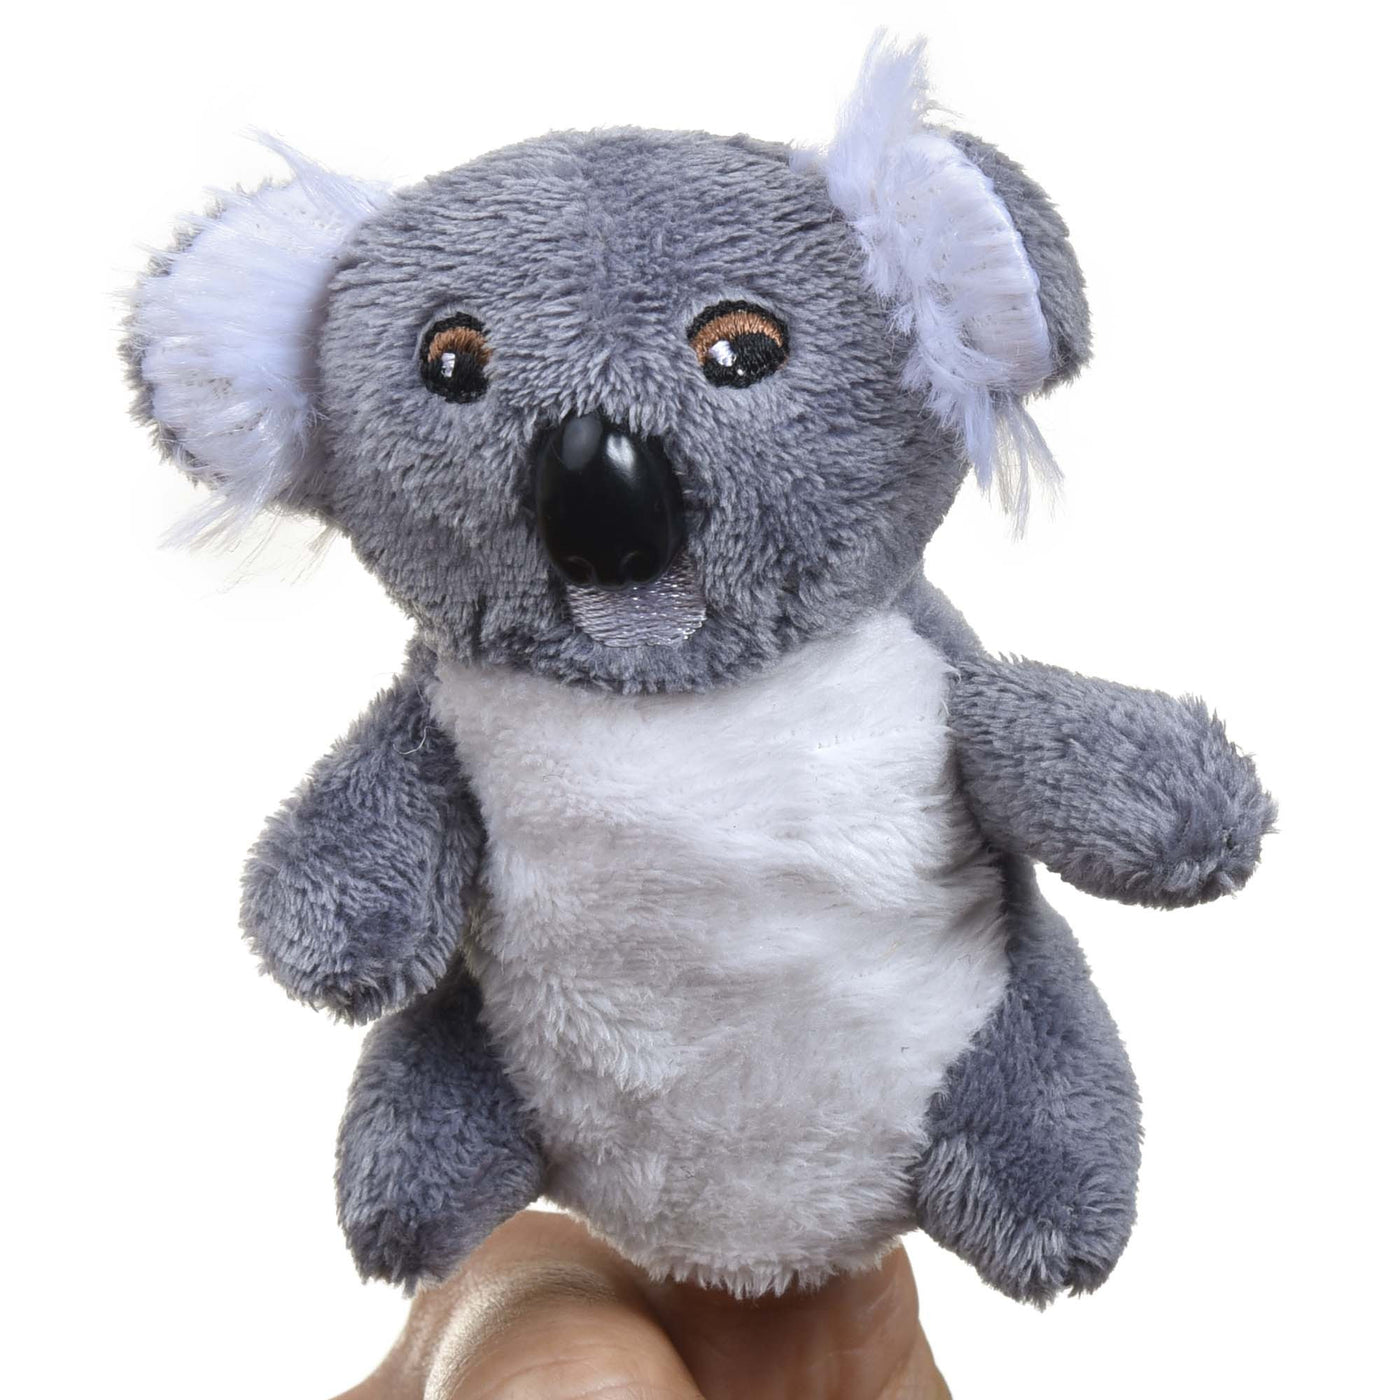 Our Koala Finger Puppet is loved by children around the world.